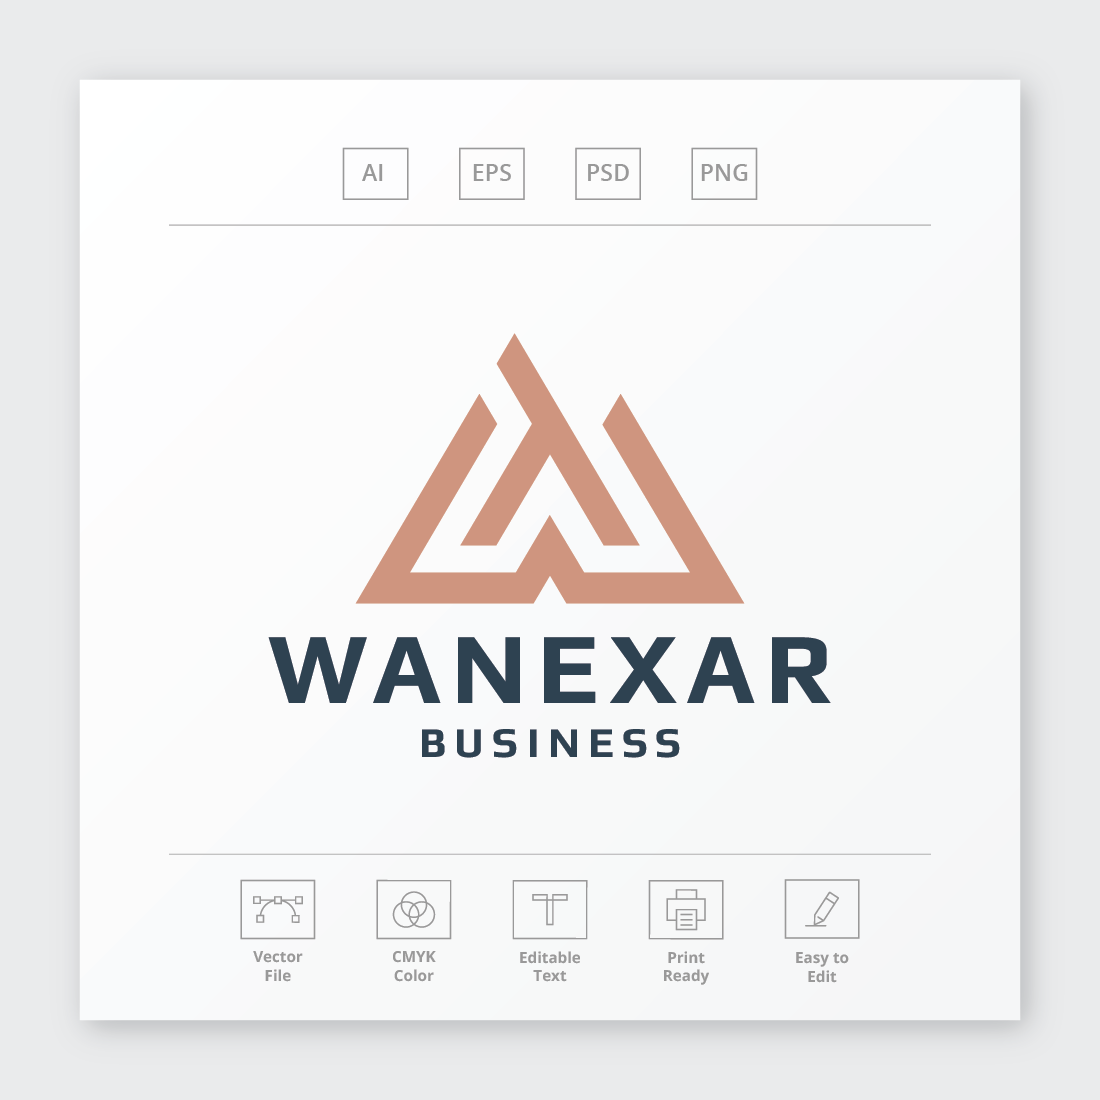 Wanexar Letter W Logo cover image.